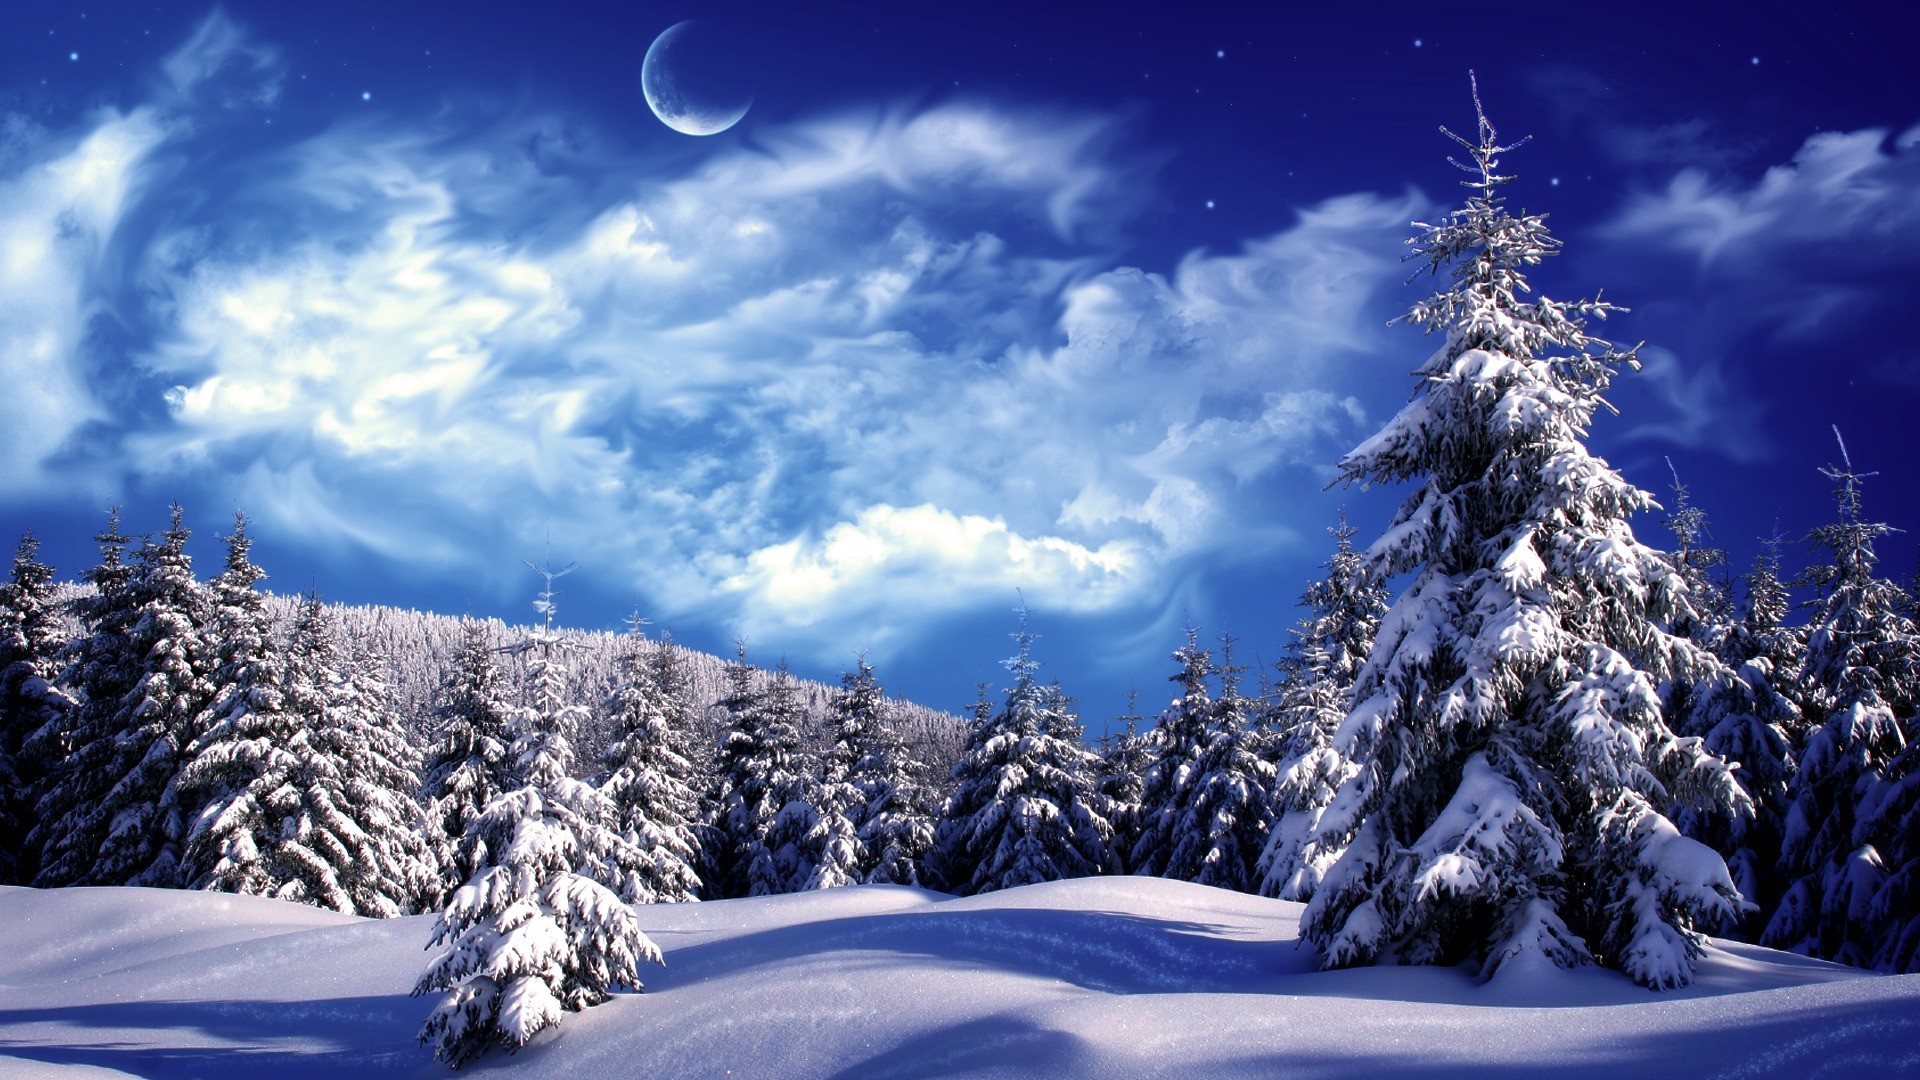 High Quality Snow Wallpapers - 1920x1080 Wallpaper 